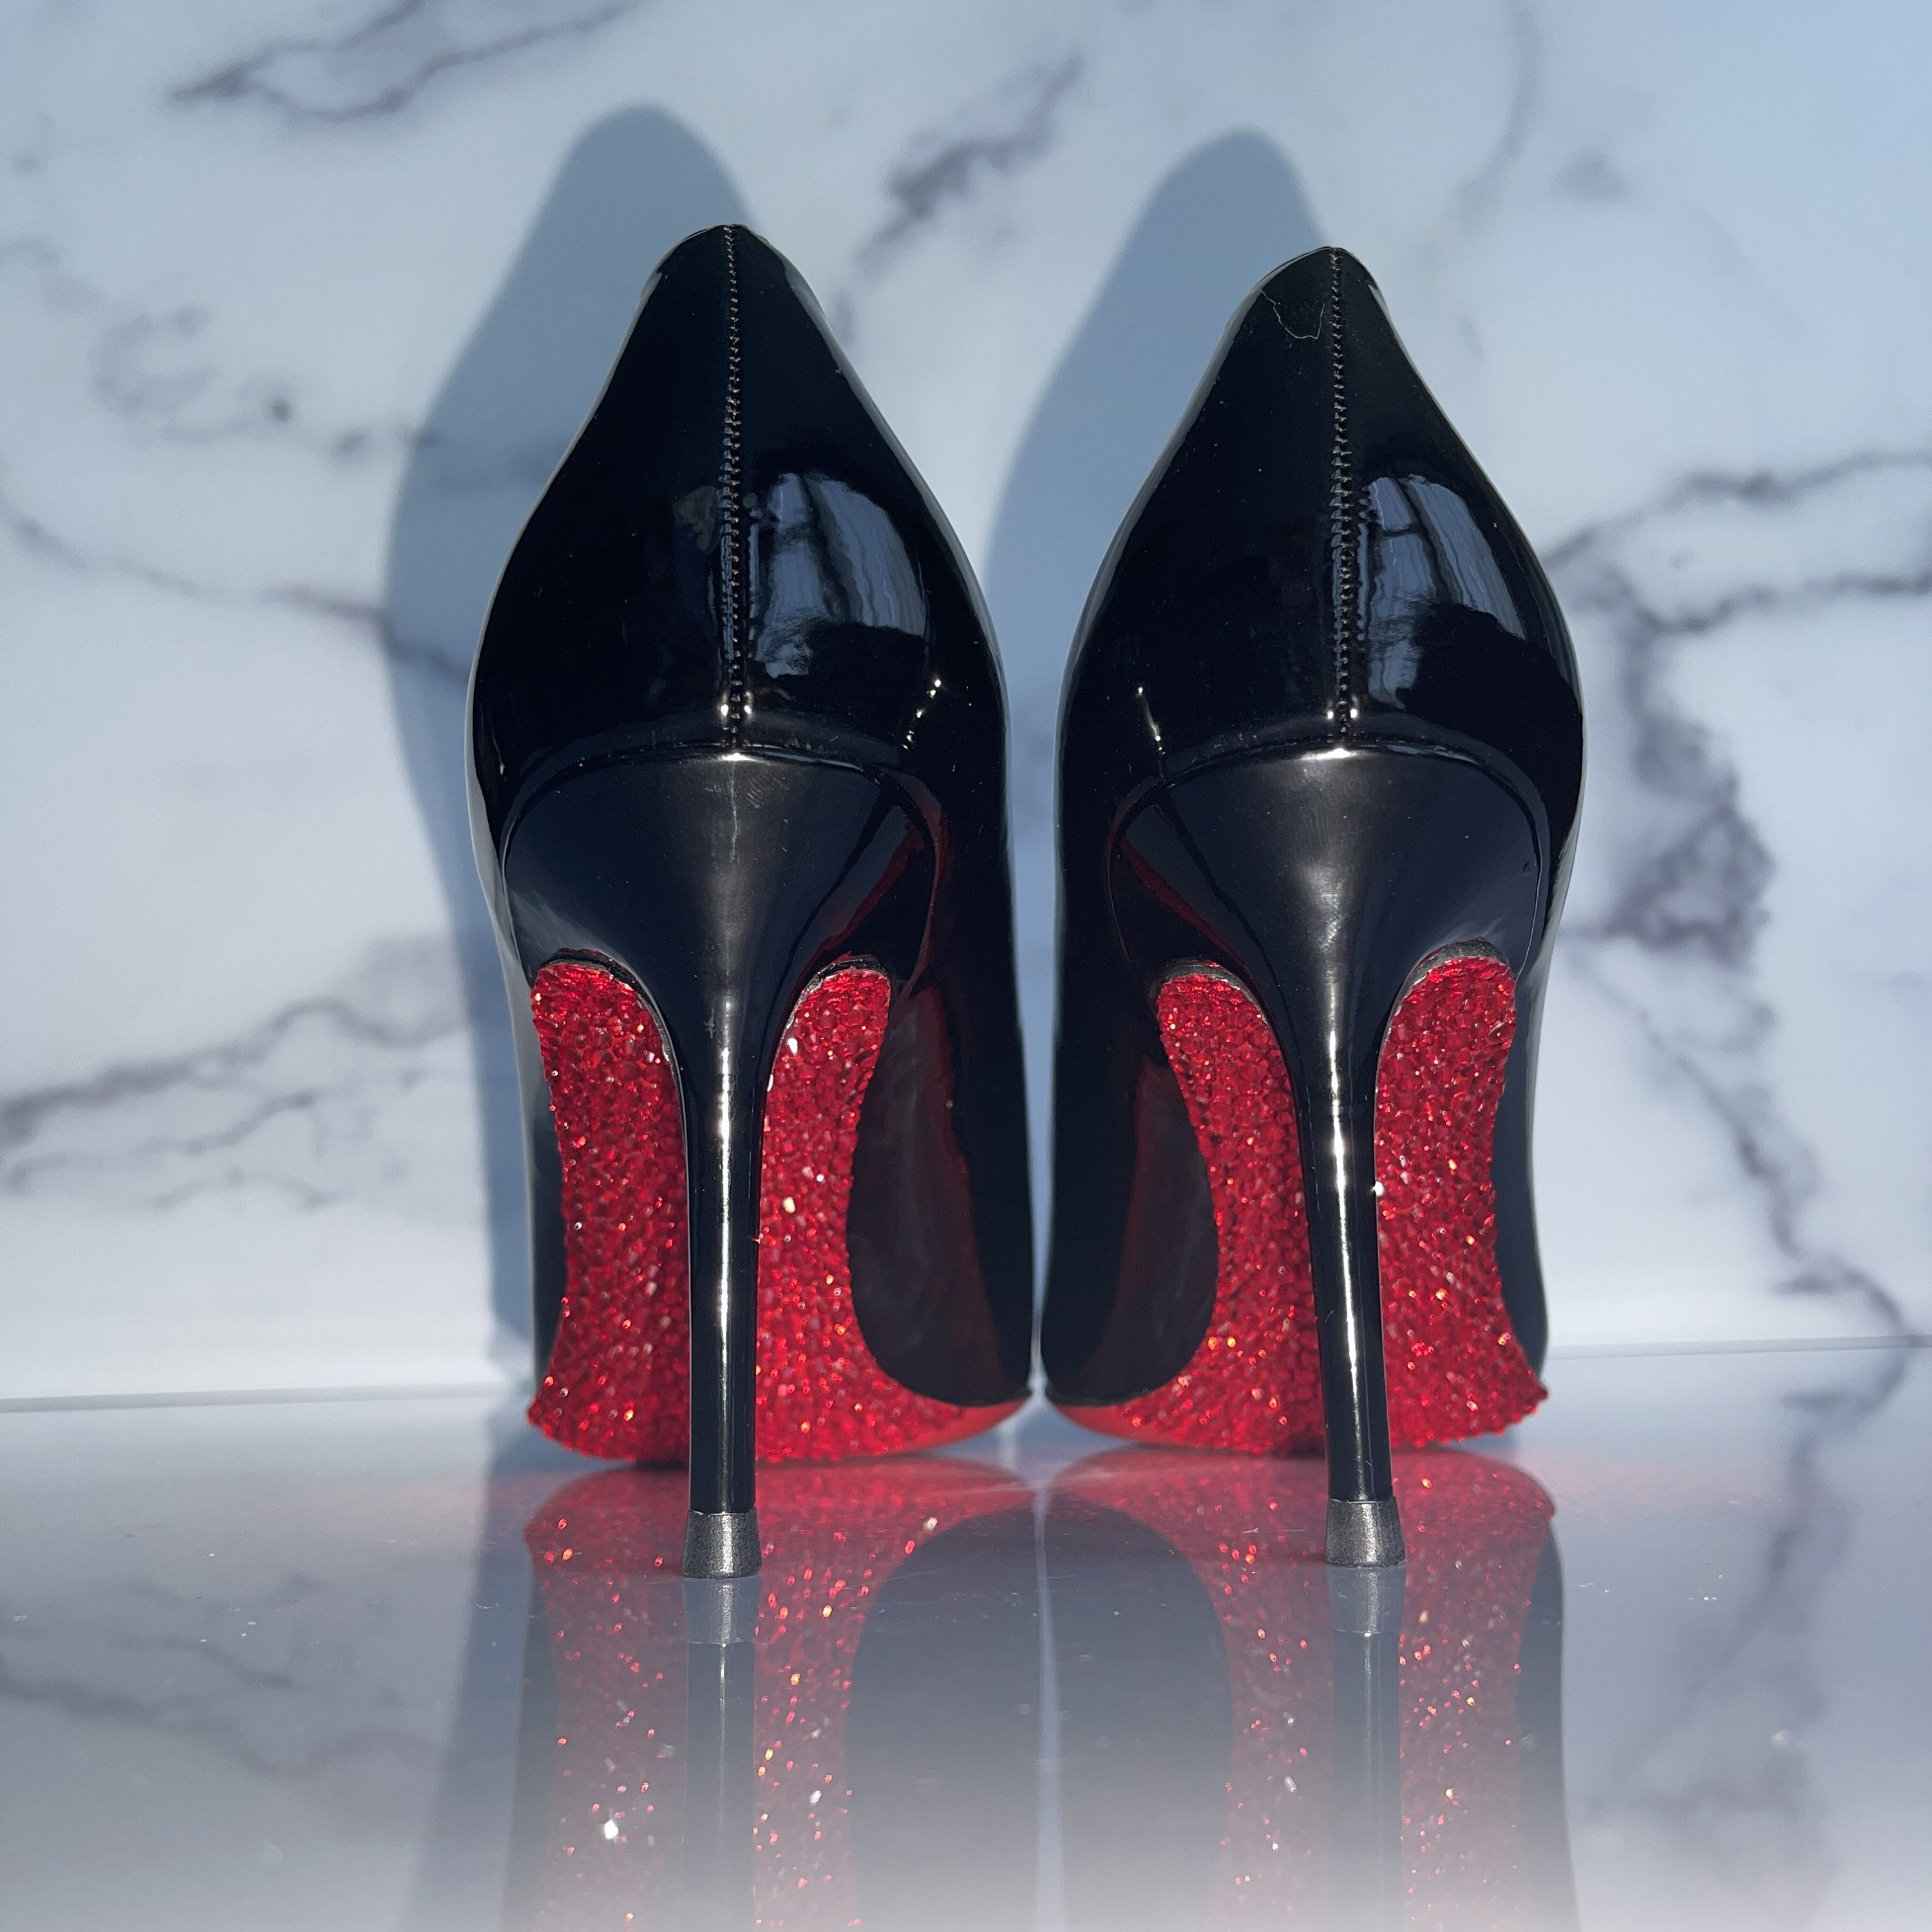 Black Red Bottom Kitten Heel Pumps, Hand Crystaled 3 Inch Heel Size US 6-11  Vegan Patent Leather Ships From US 